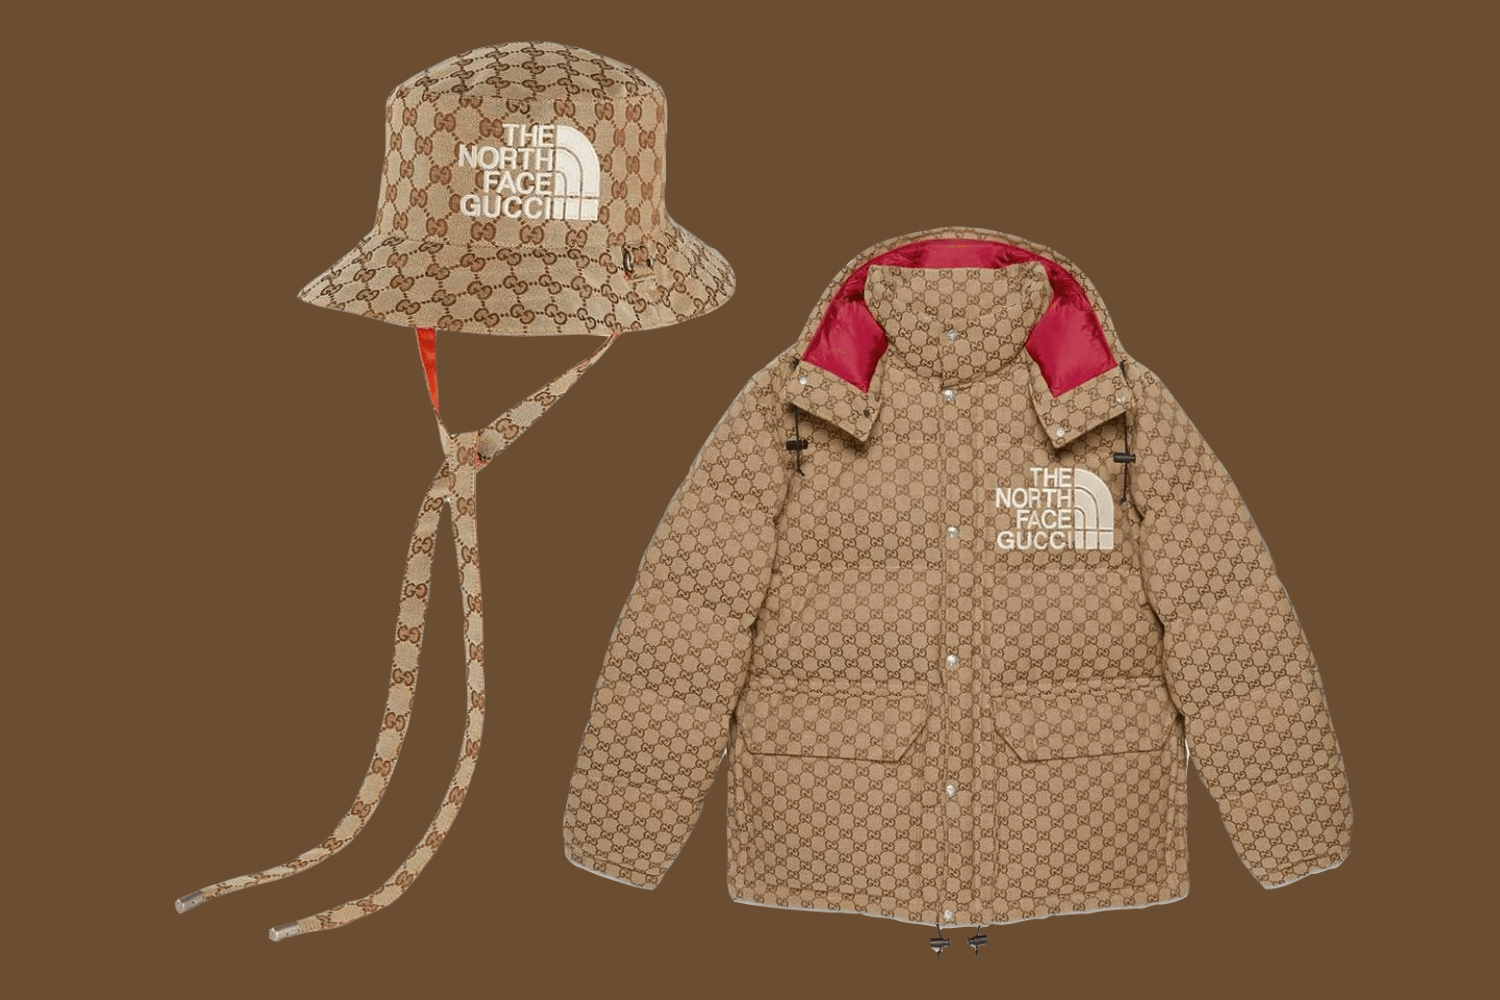 Gucci x The North Face collab komt met nieuwe collectie